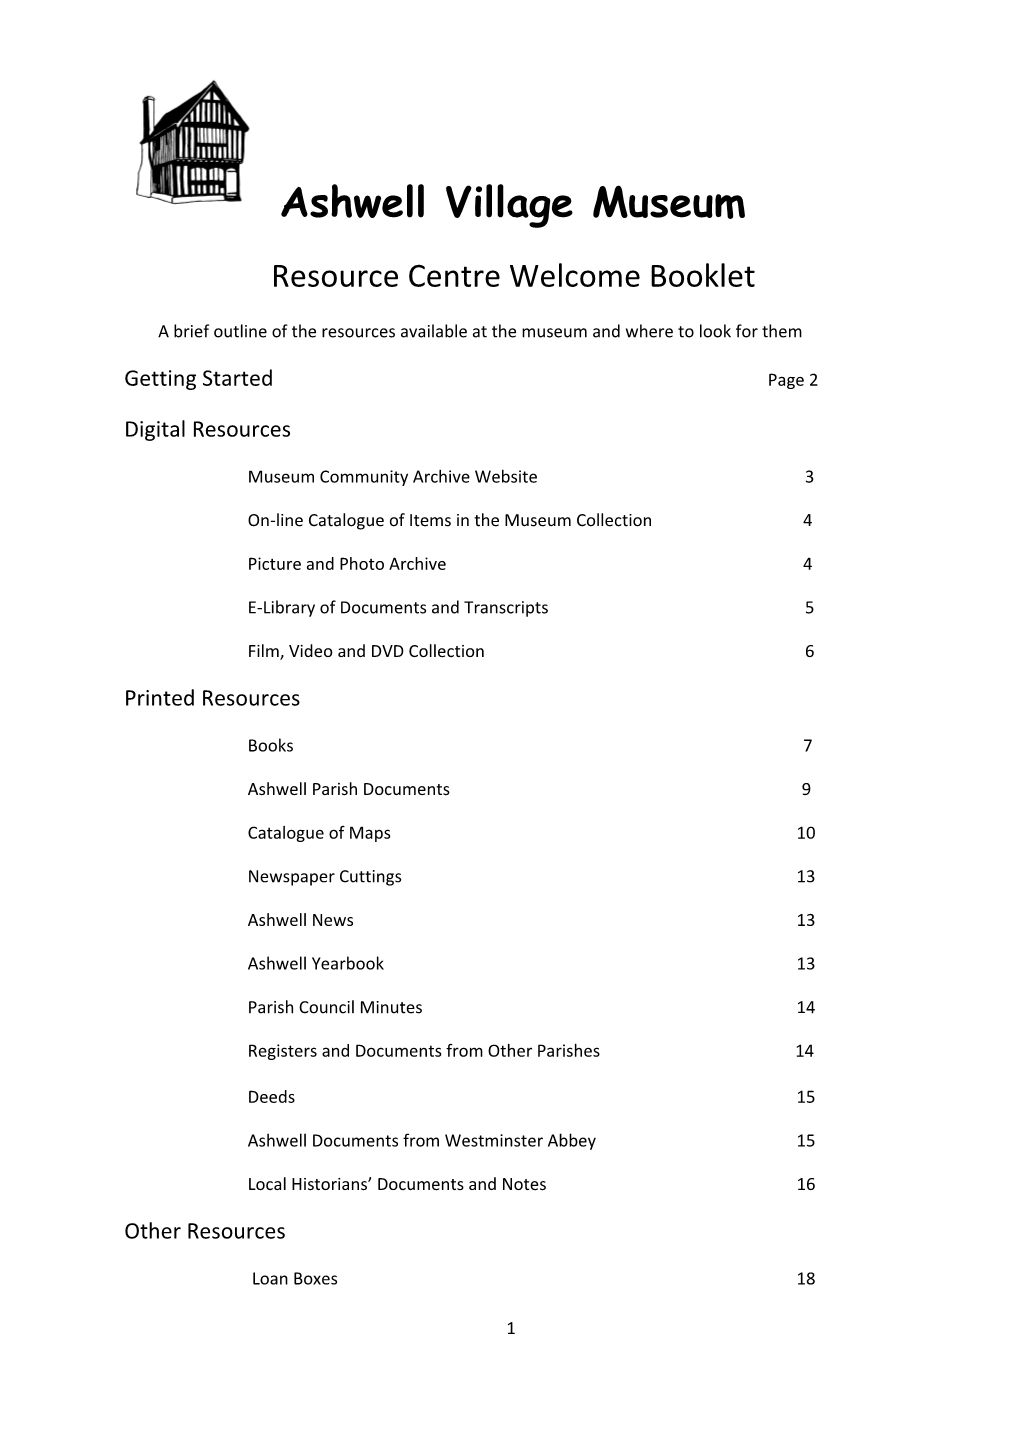 Resource Centre Welcome Booklet